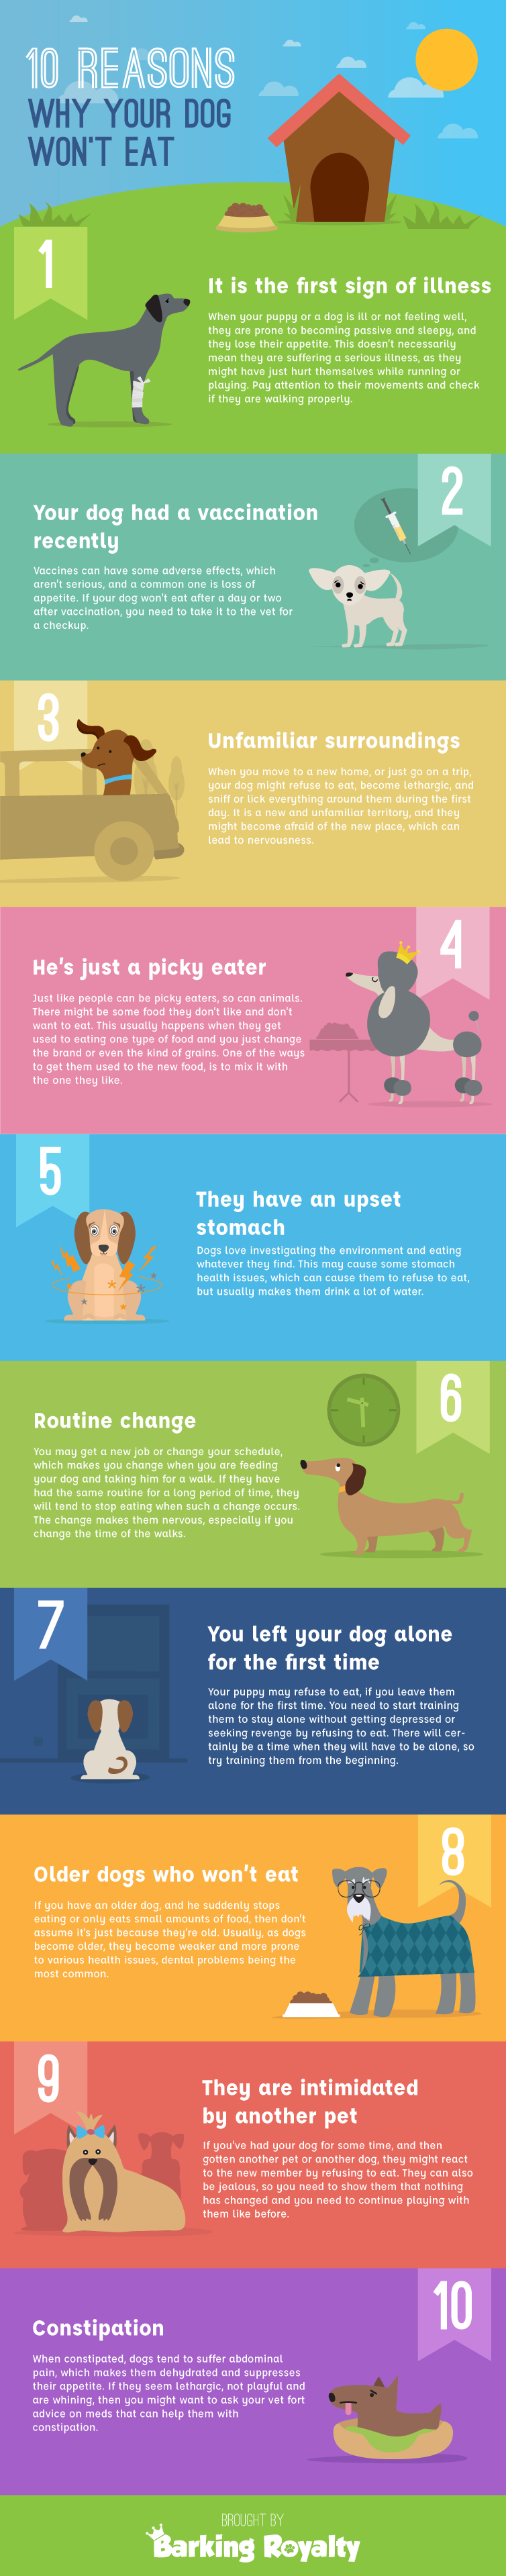 10 Reasons Why Your Dog Won’t Eat